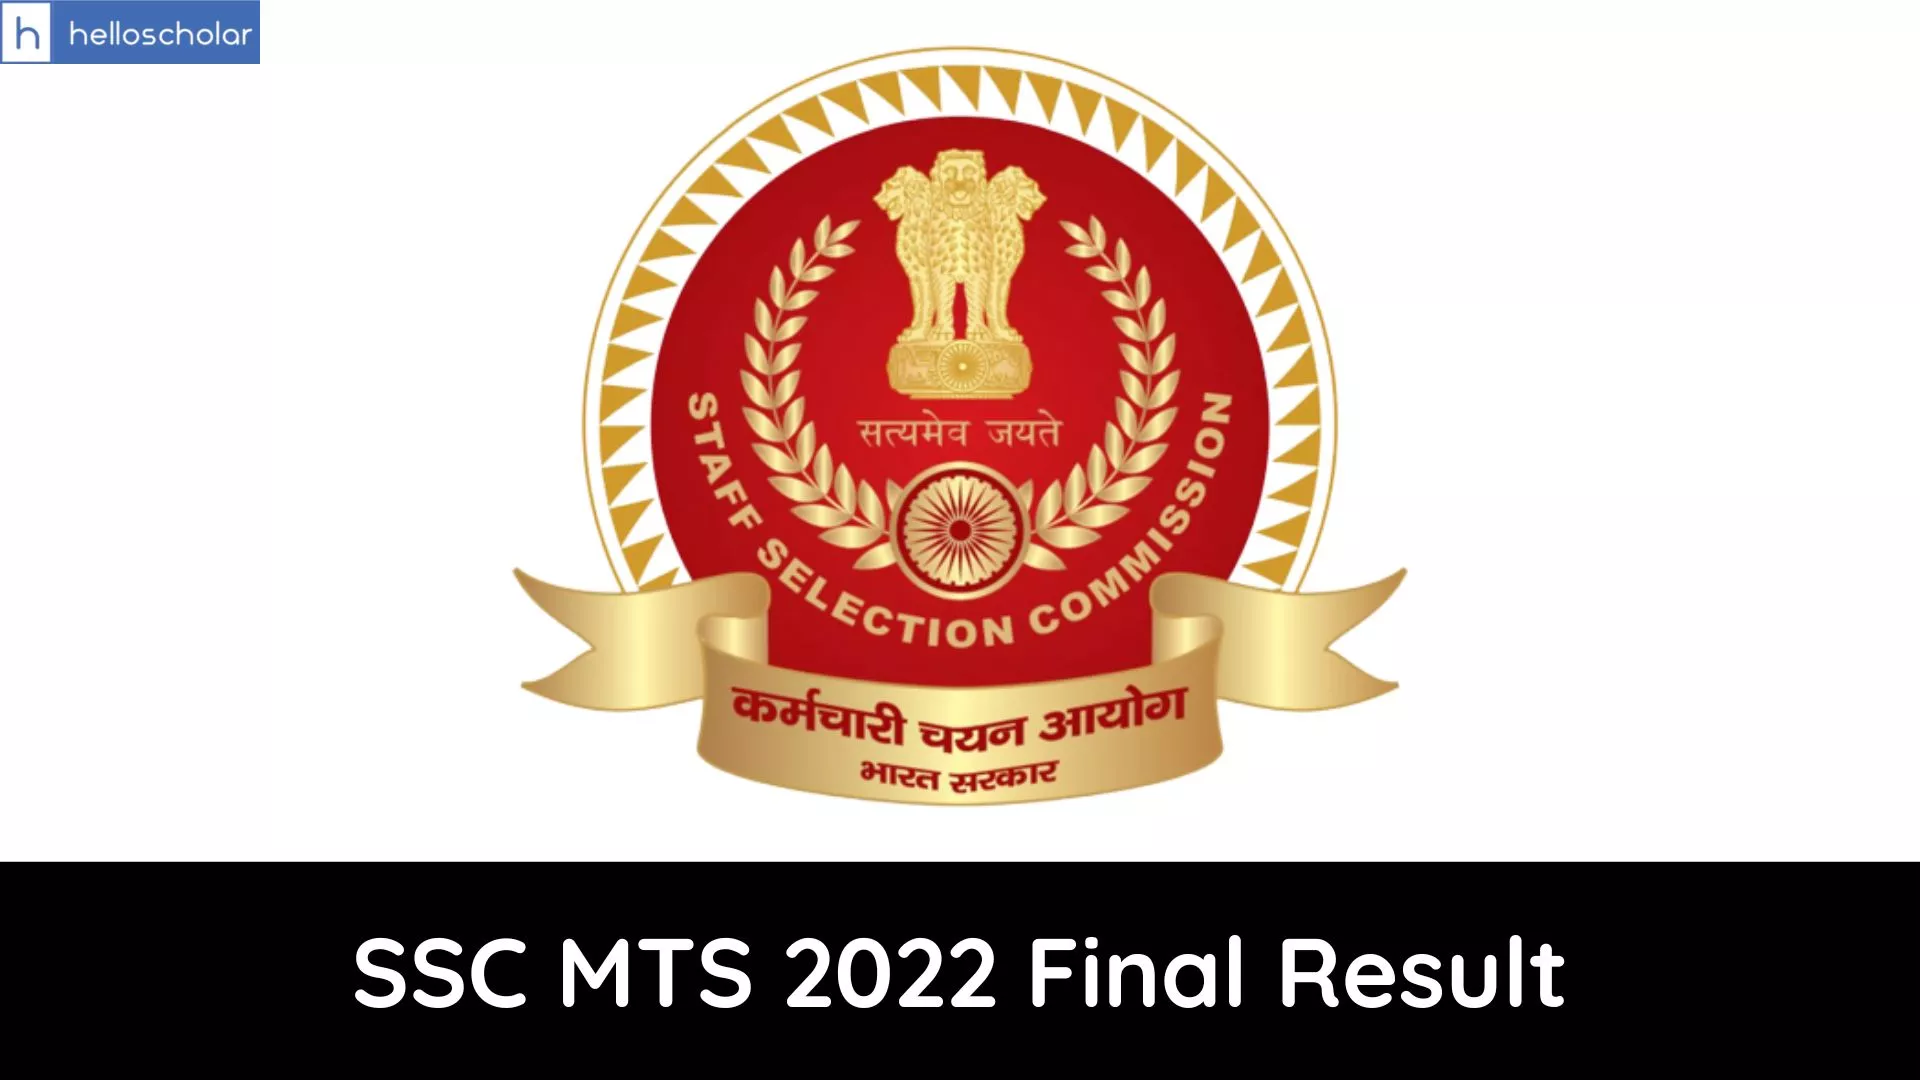 SSC CGL 2020-21 Notification Out: check New Eligibility Criteria, Exam  dates, Syllabus and How To Apply